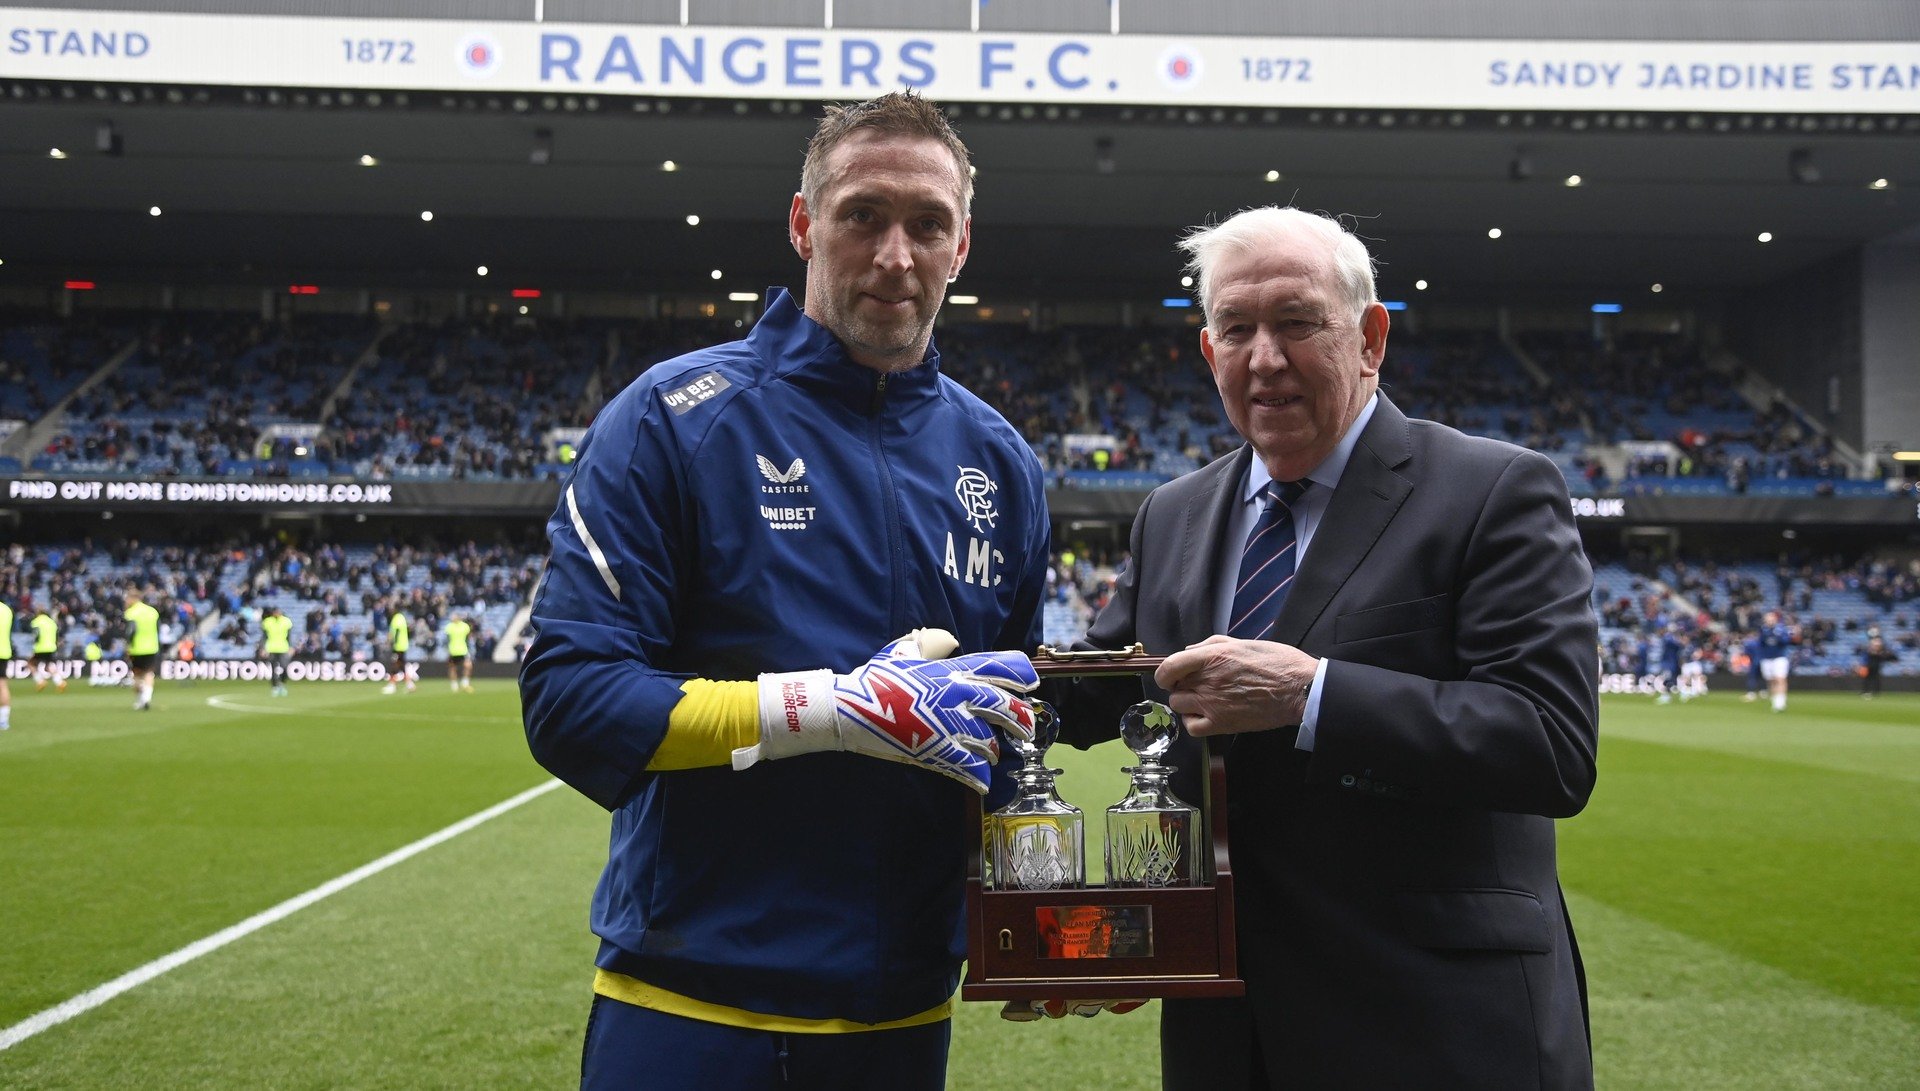 Greig presented McGregor with a trophy to mark his 500th game in goals for Rangers.